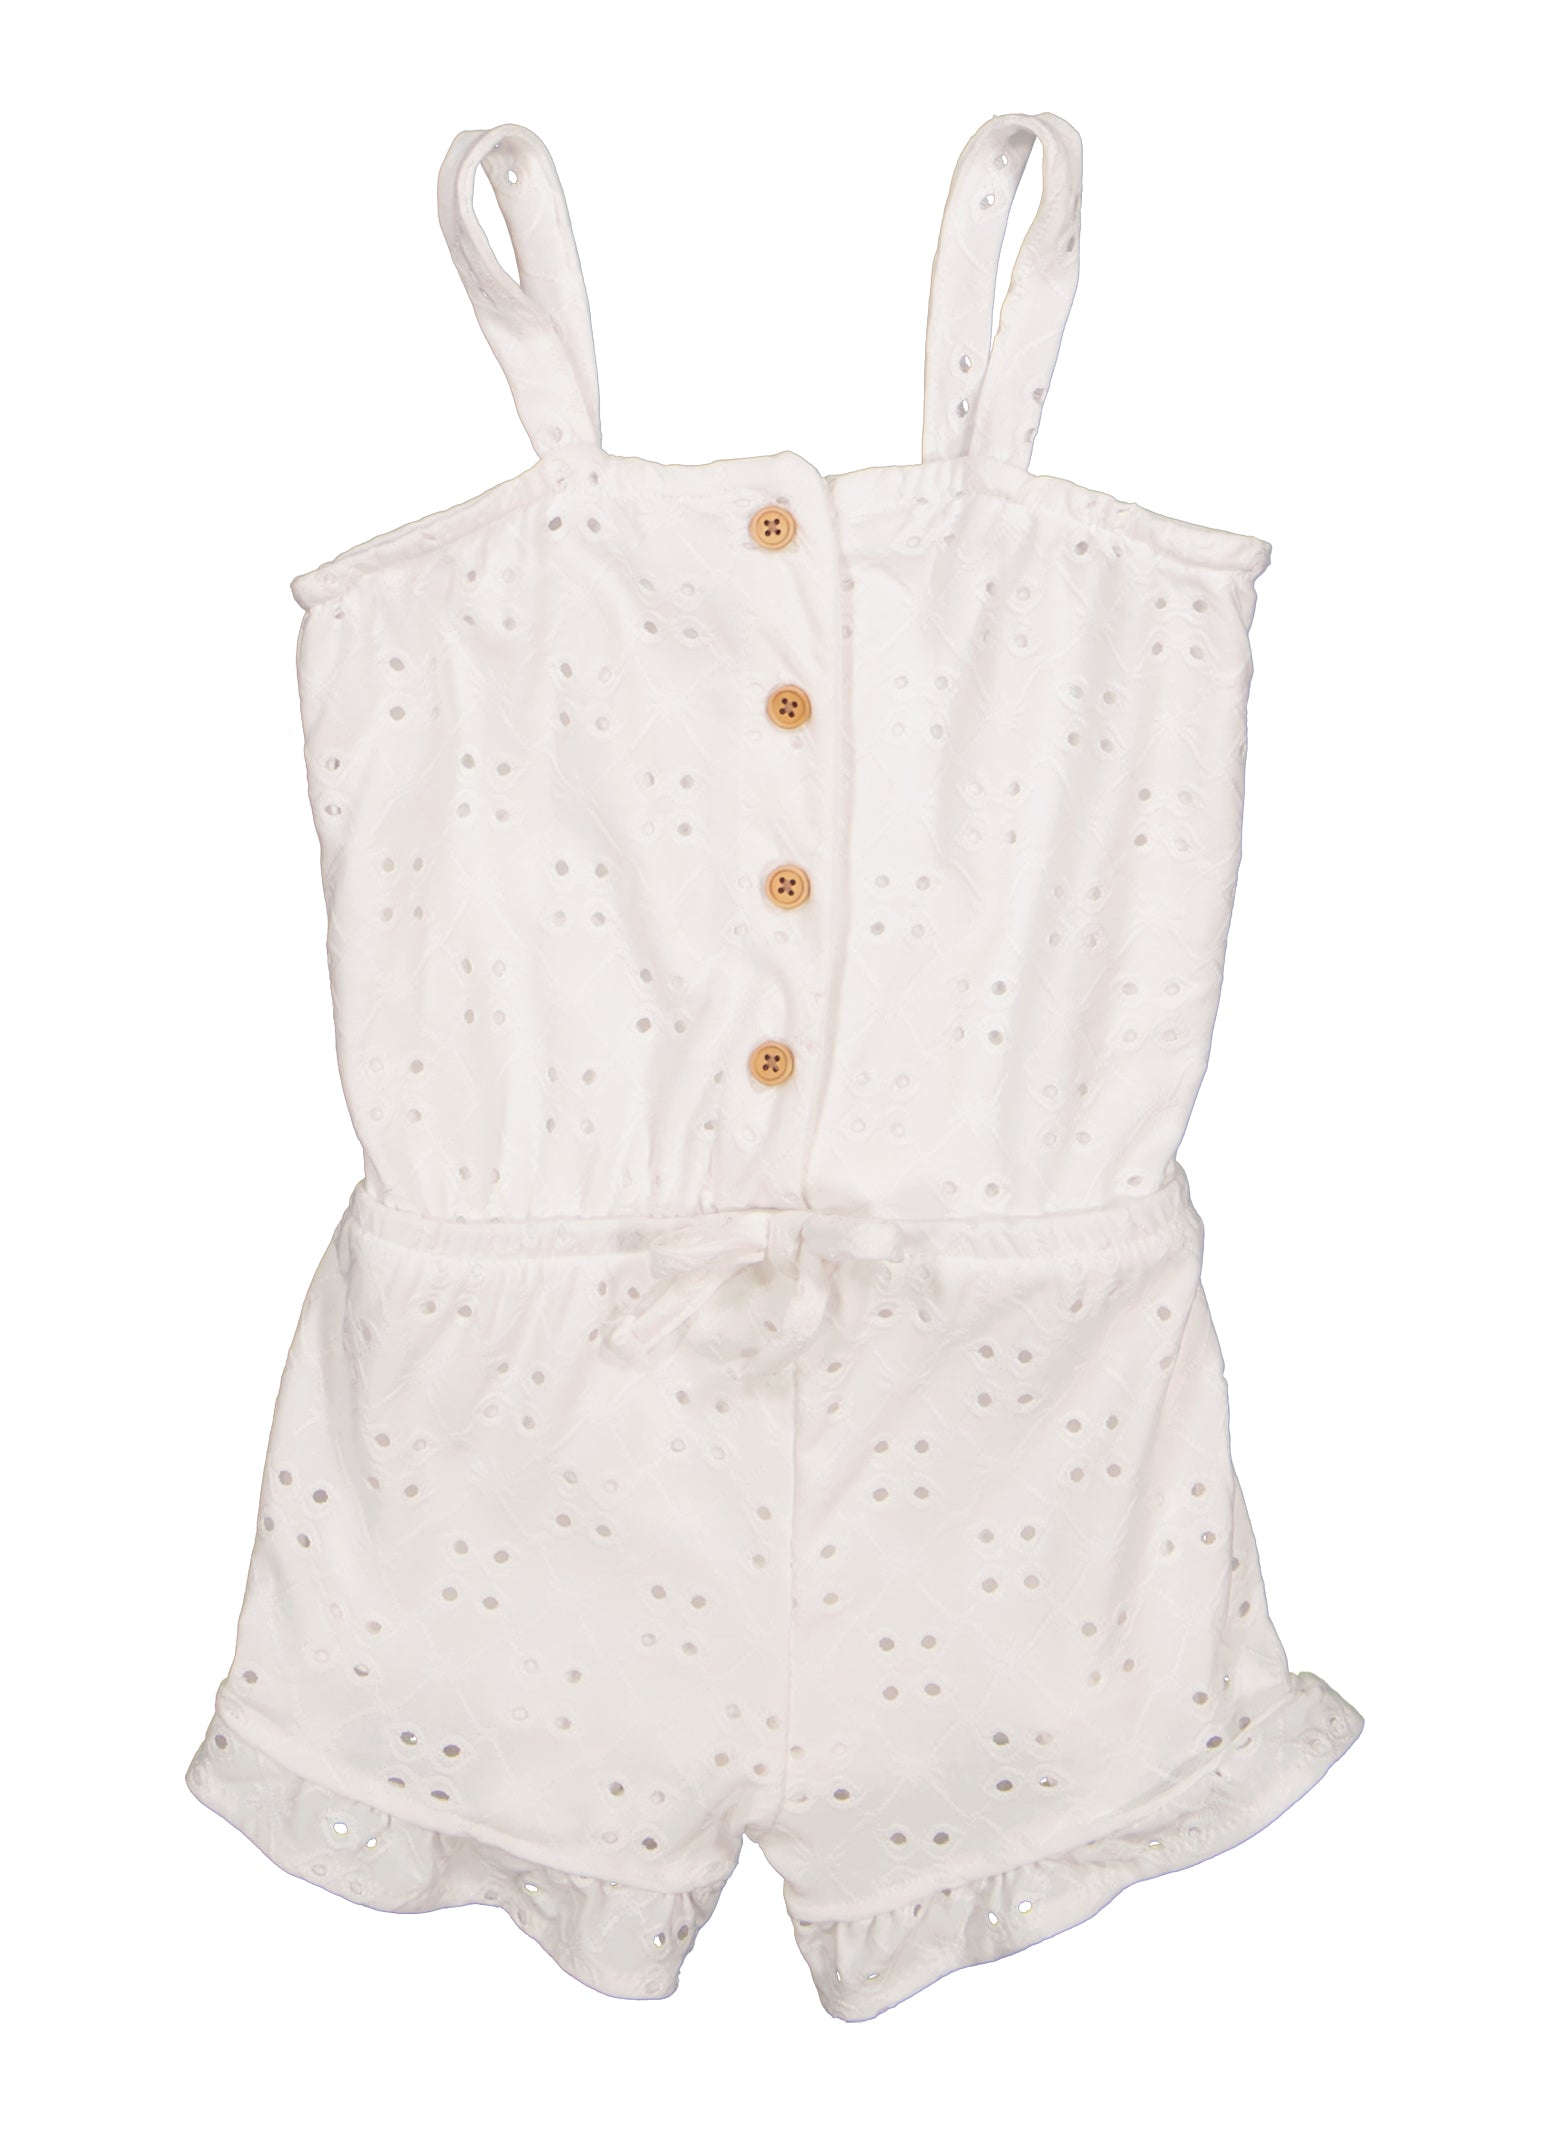 Toddler Girls Eyelet Button Front Romper, White, Size 4T